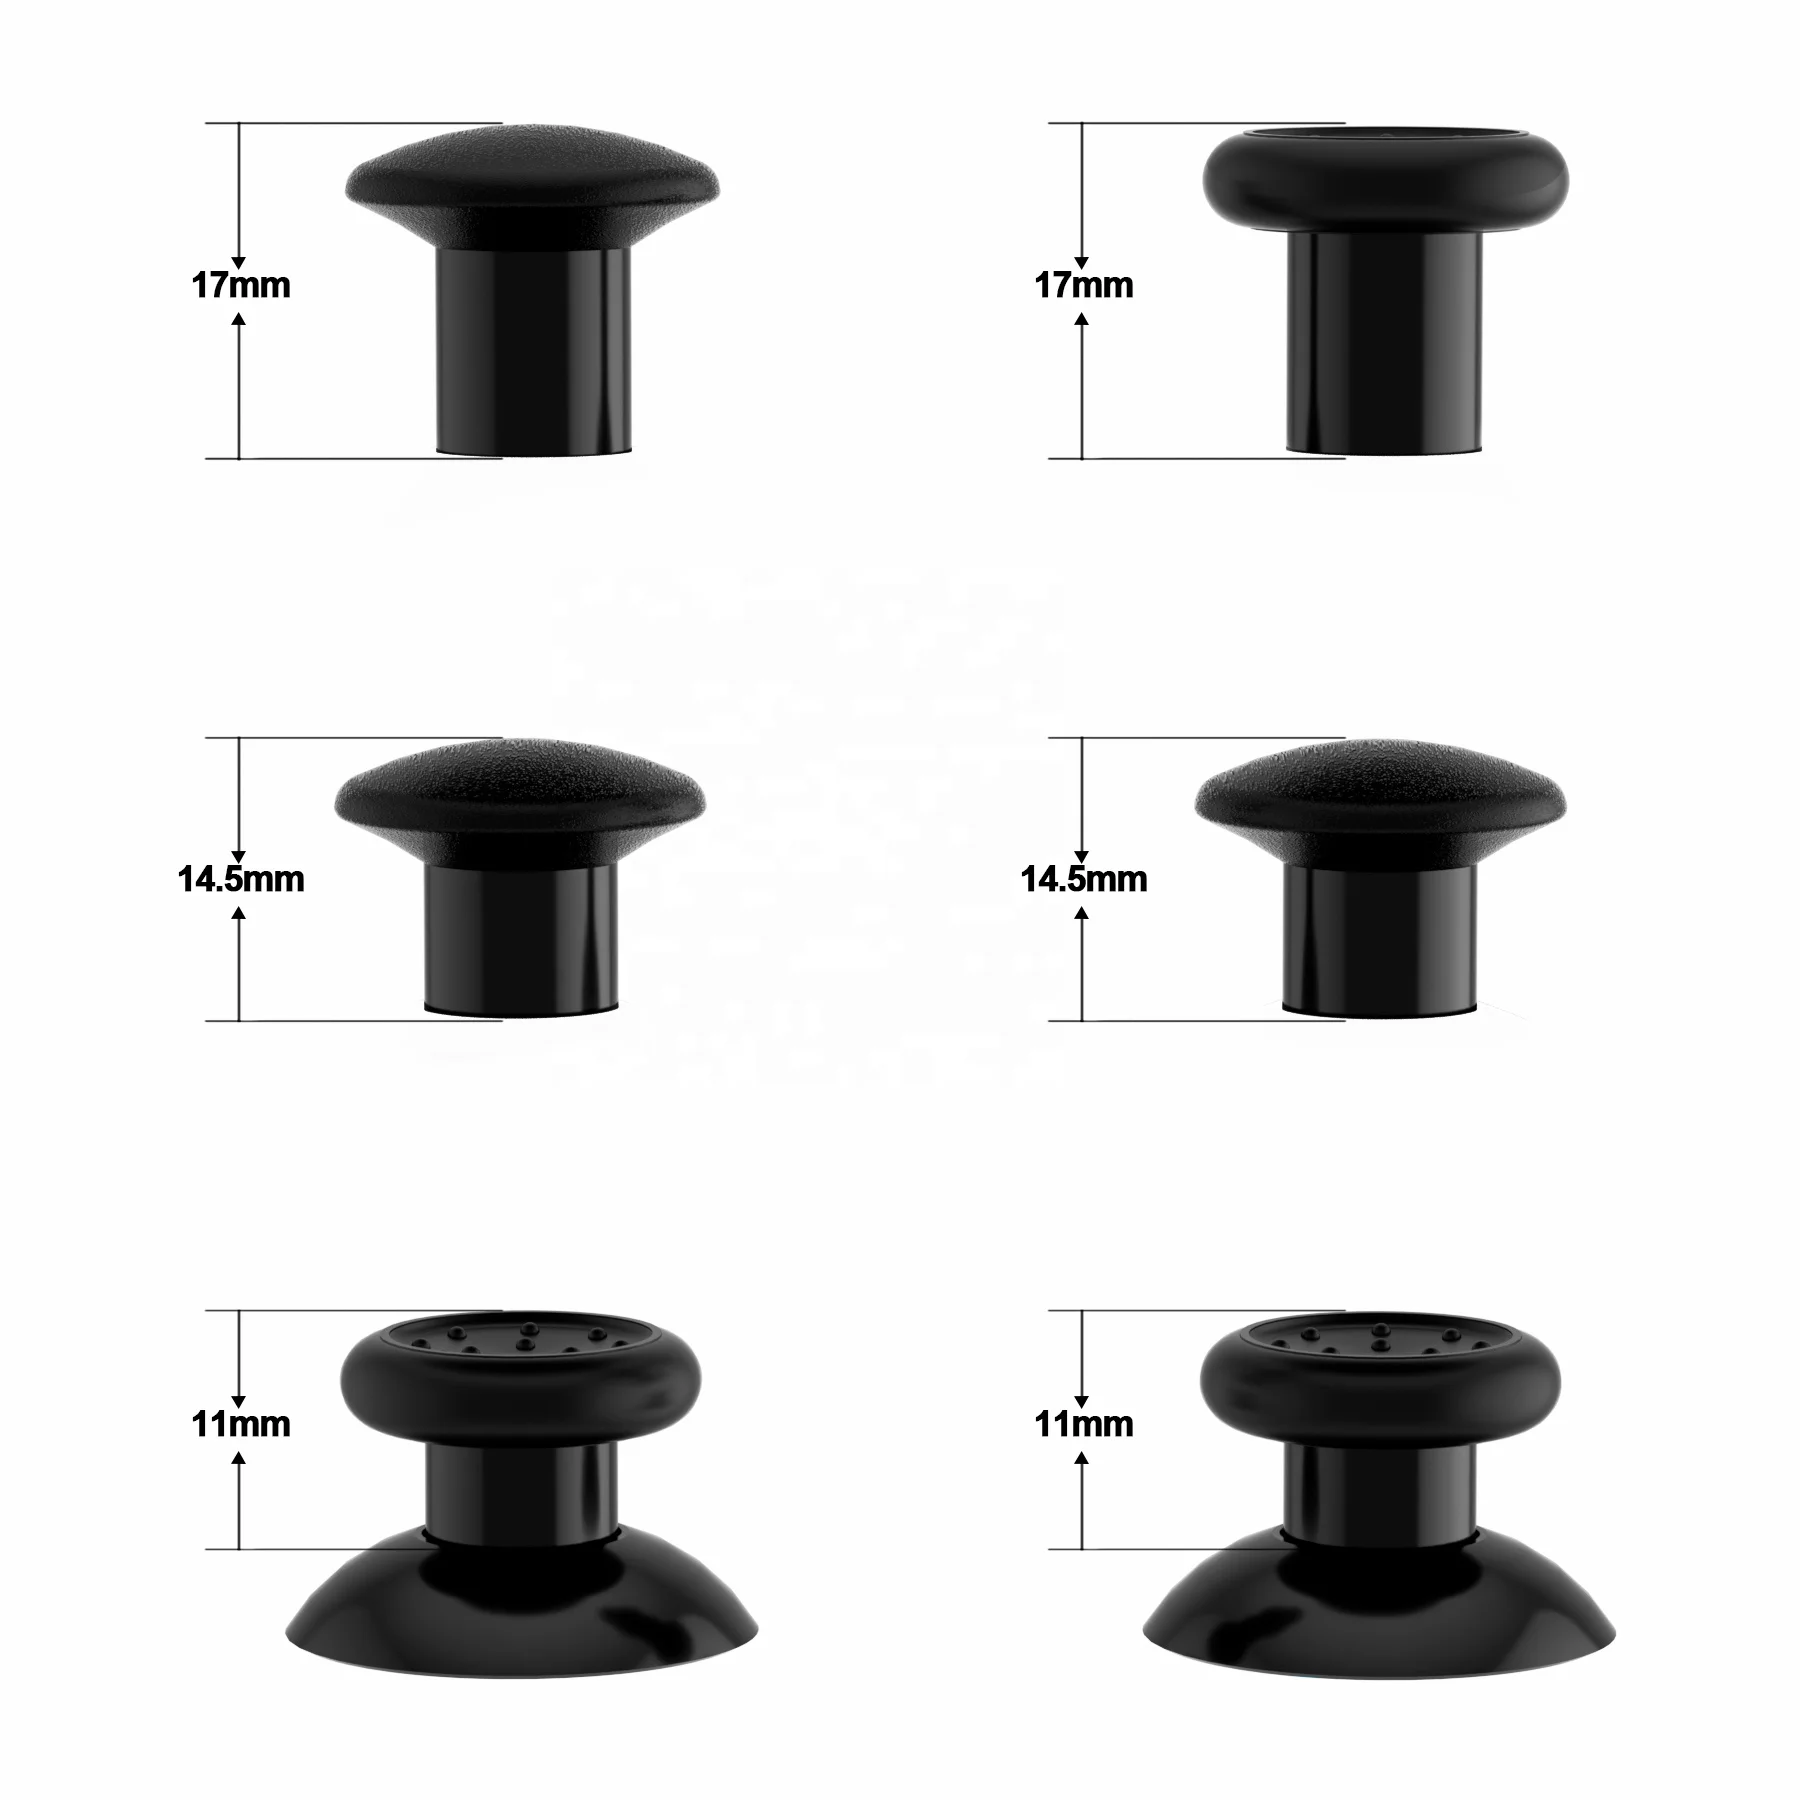 

Black Joystick For PS4 Controller 8 In 1 Removable Thumb Sticks Thumbstick For Gamepad PS5 Mod Button Kit Set